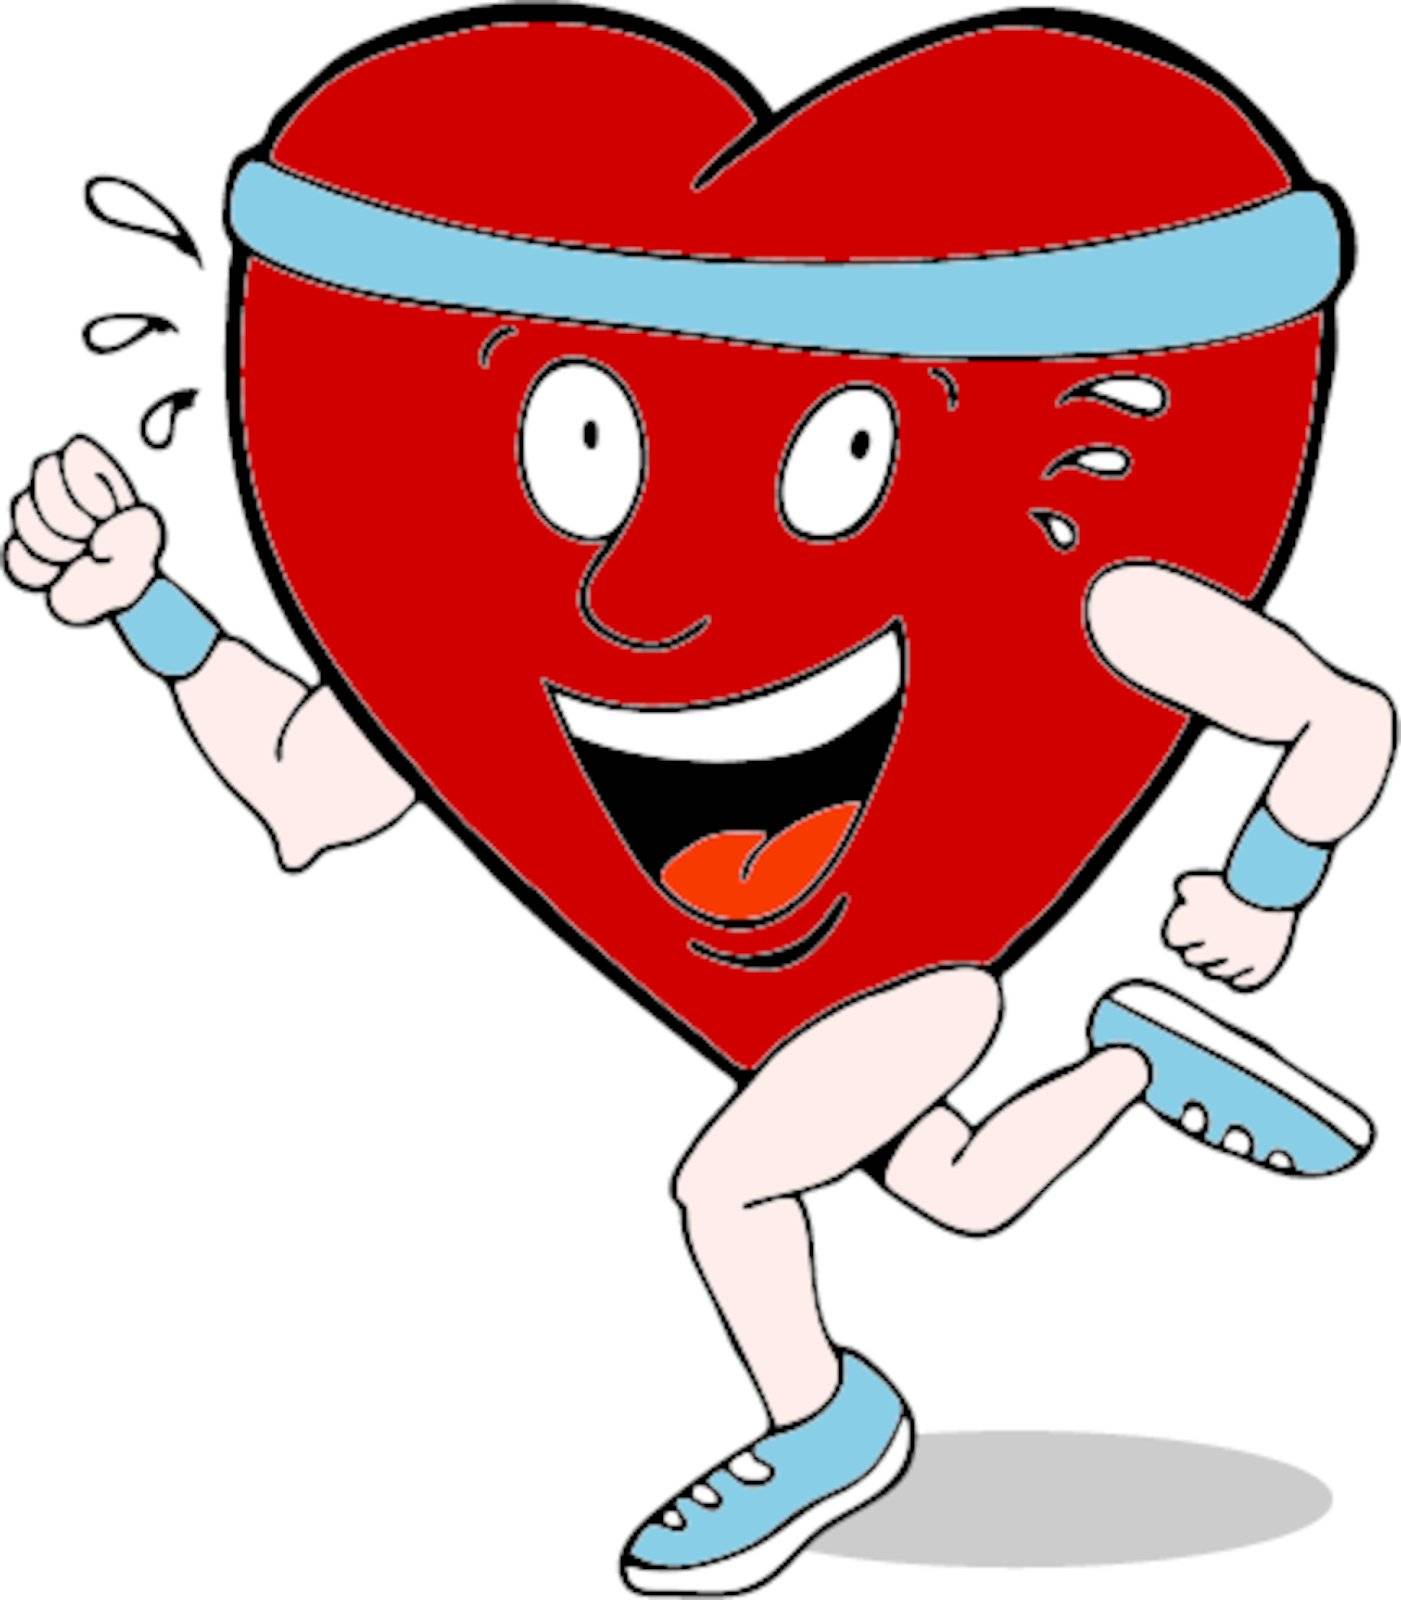 An image of a healthy heart shaped character running.